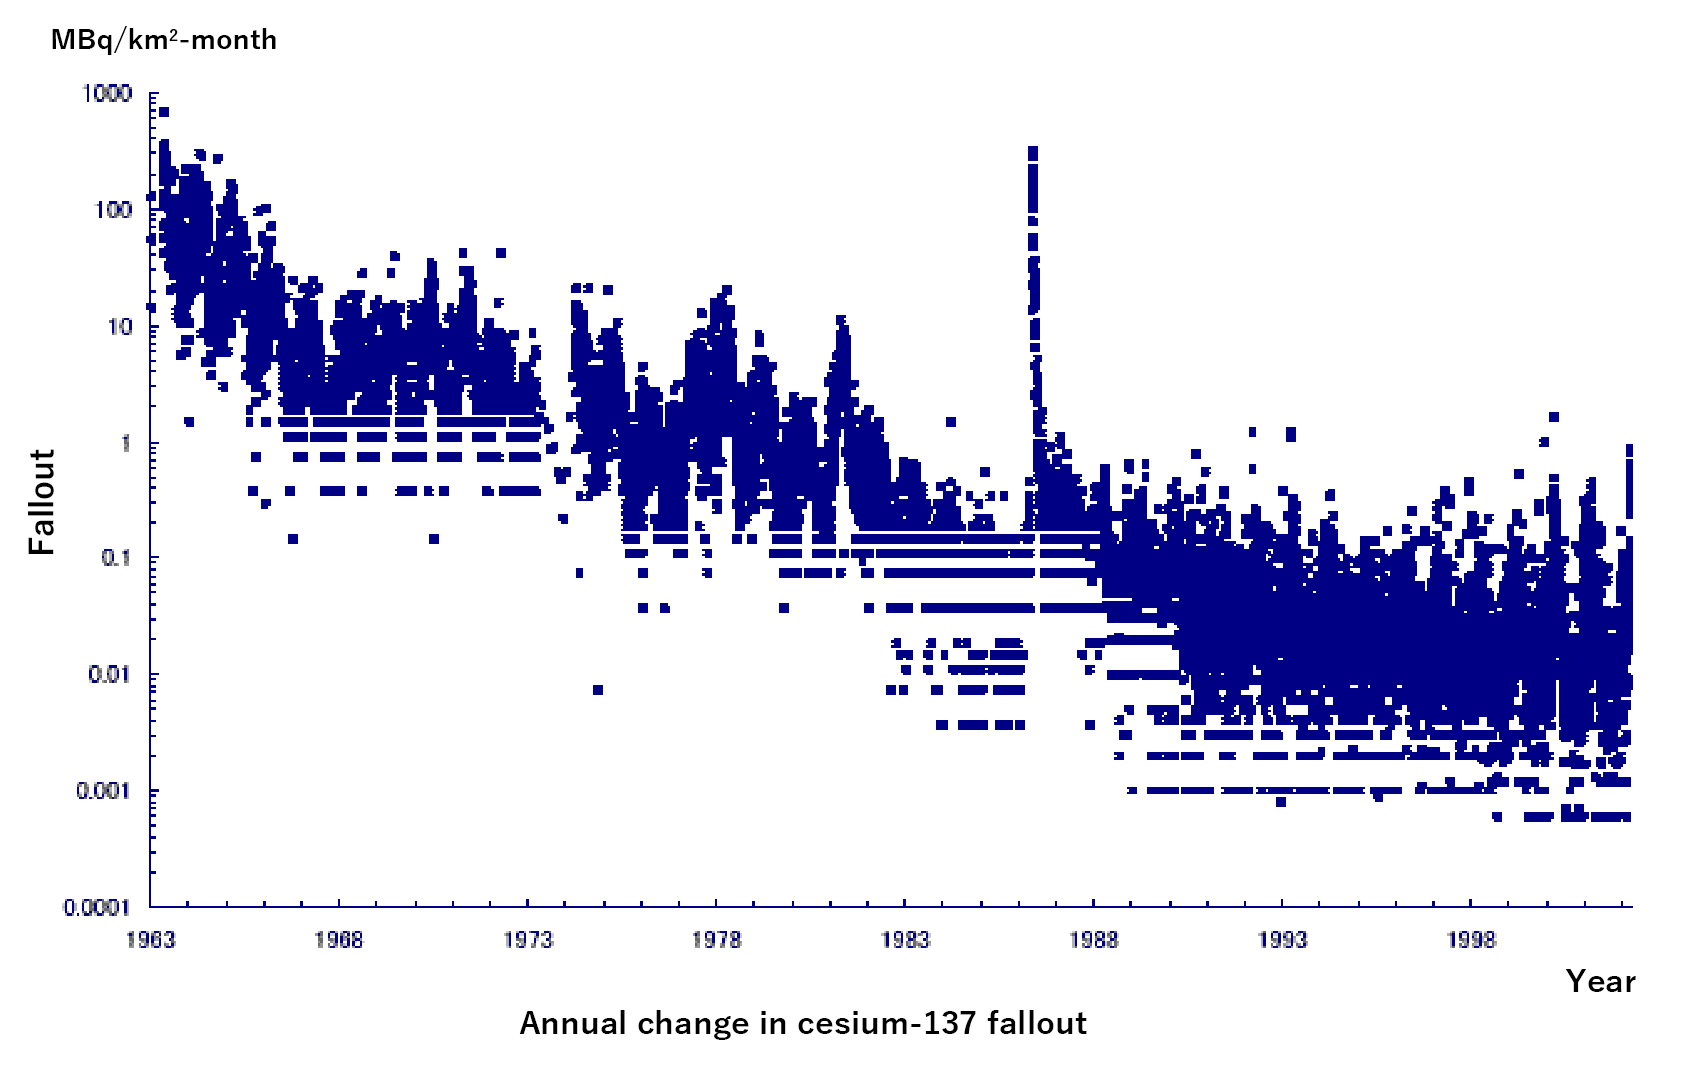 Annual change in cesium-137 fallout